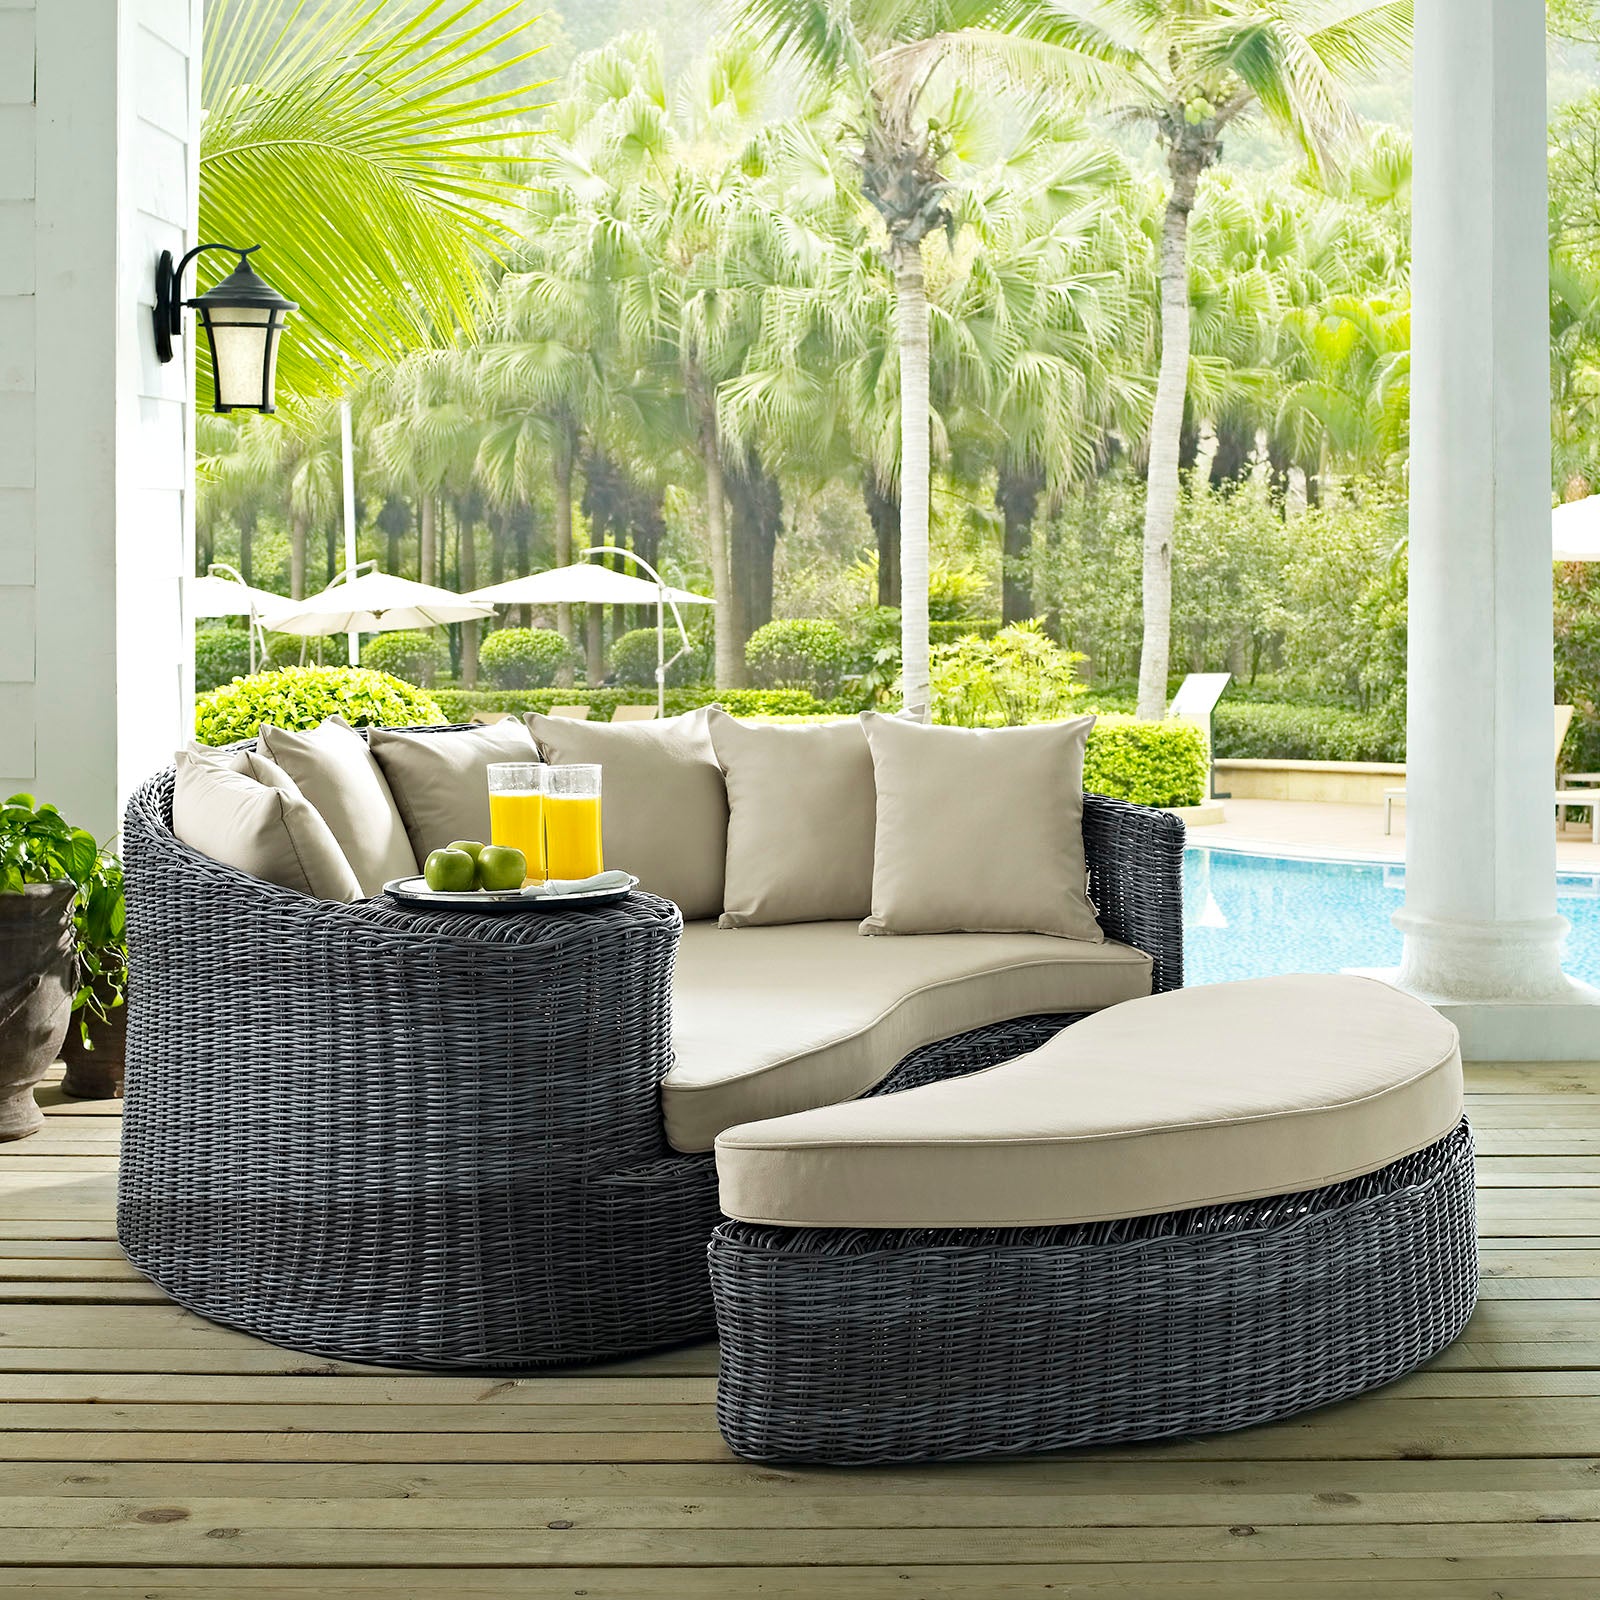 Modway Patio Daybeds - Summon Outdoor Patio Sunbrella Daybed Antique Canvas Beige